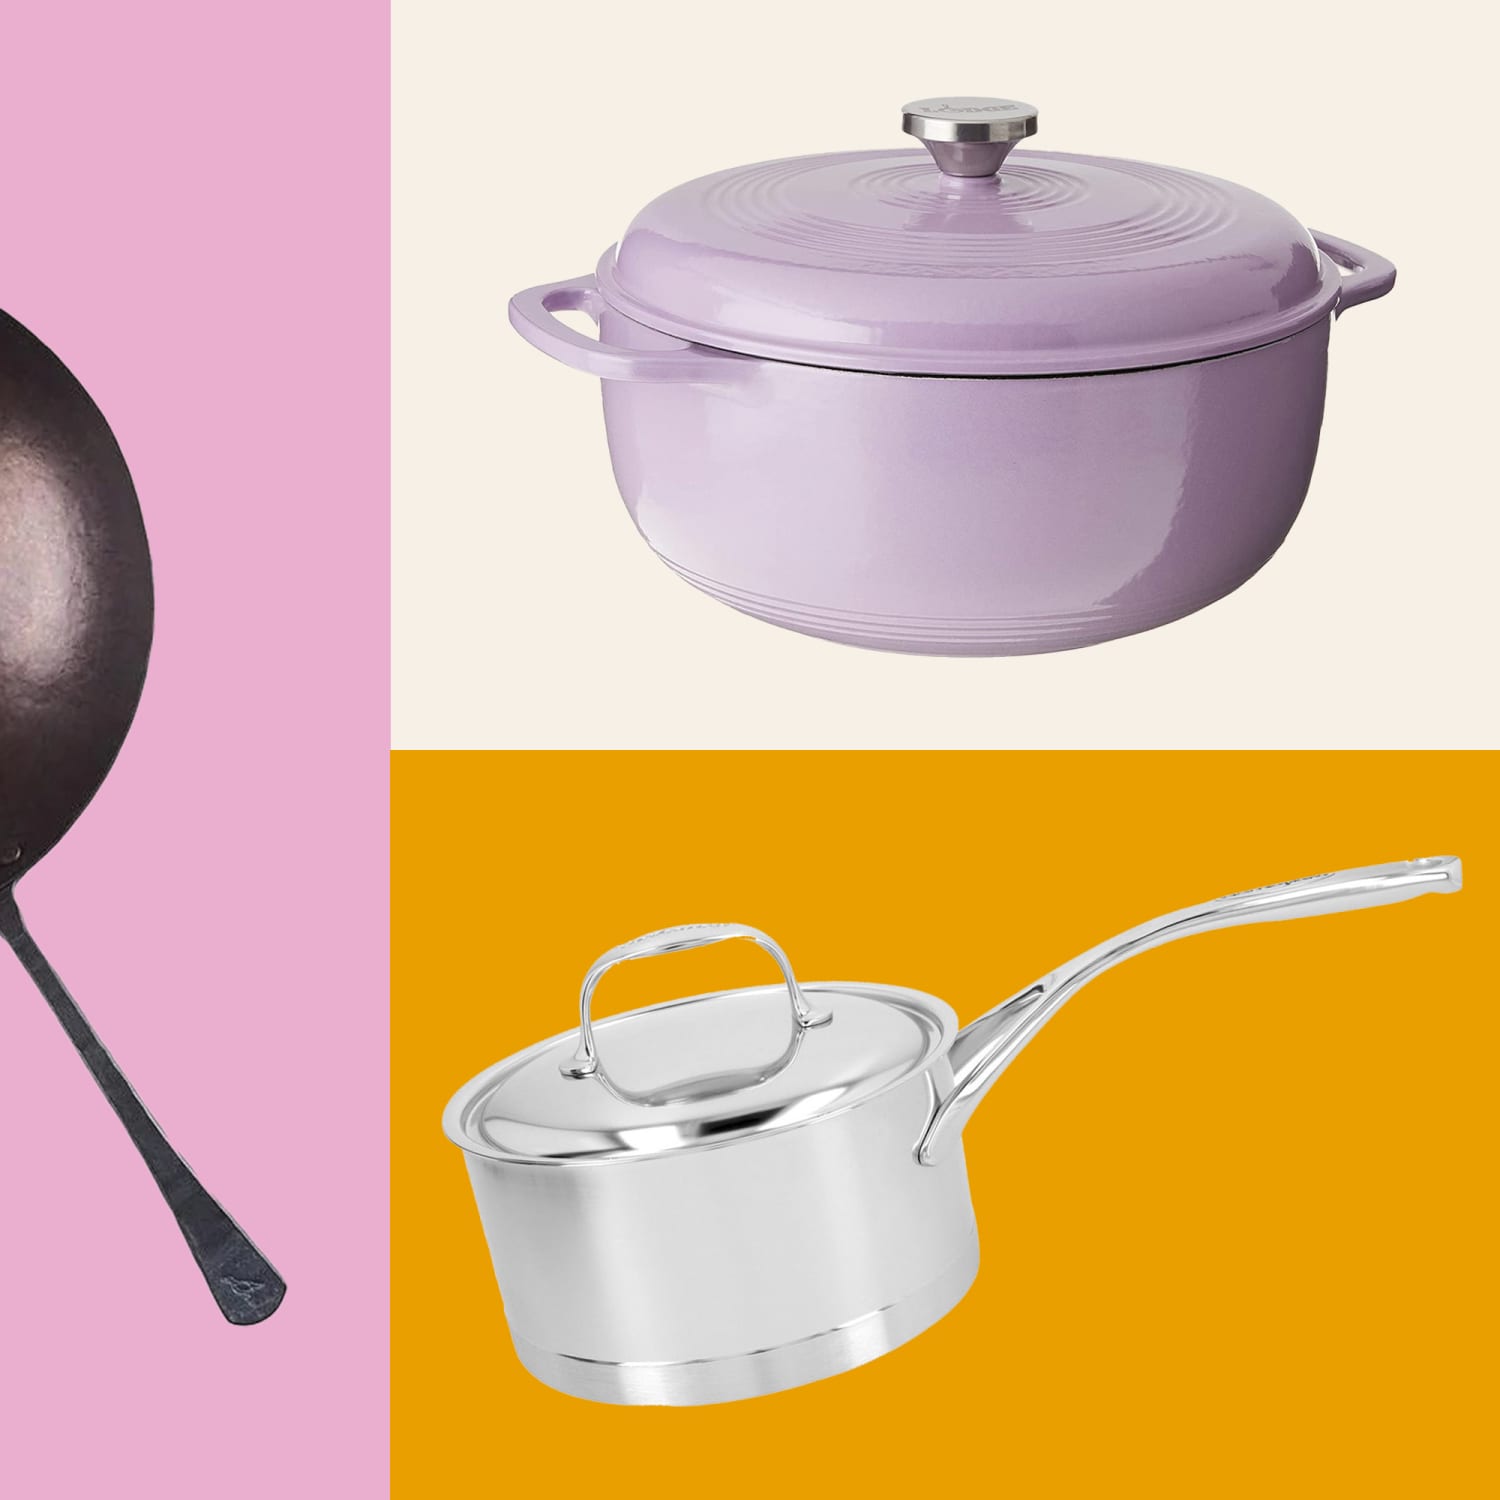 9 Essential Pots & Pans That You Need For Every Kitchen by Archana's Kitchen